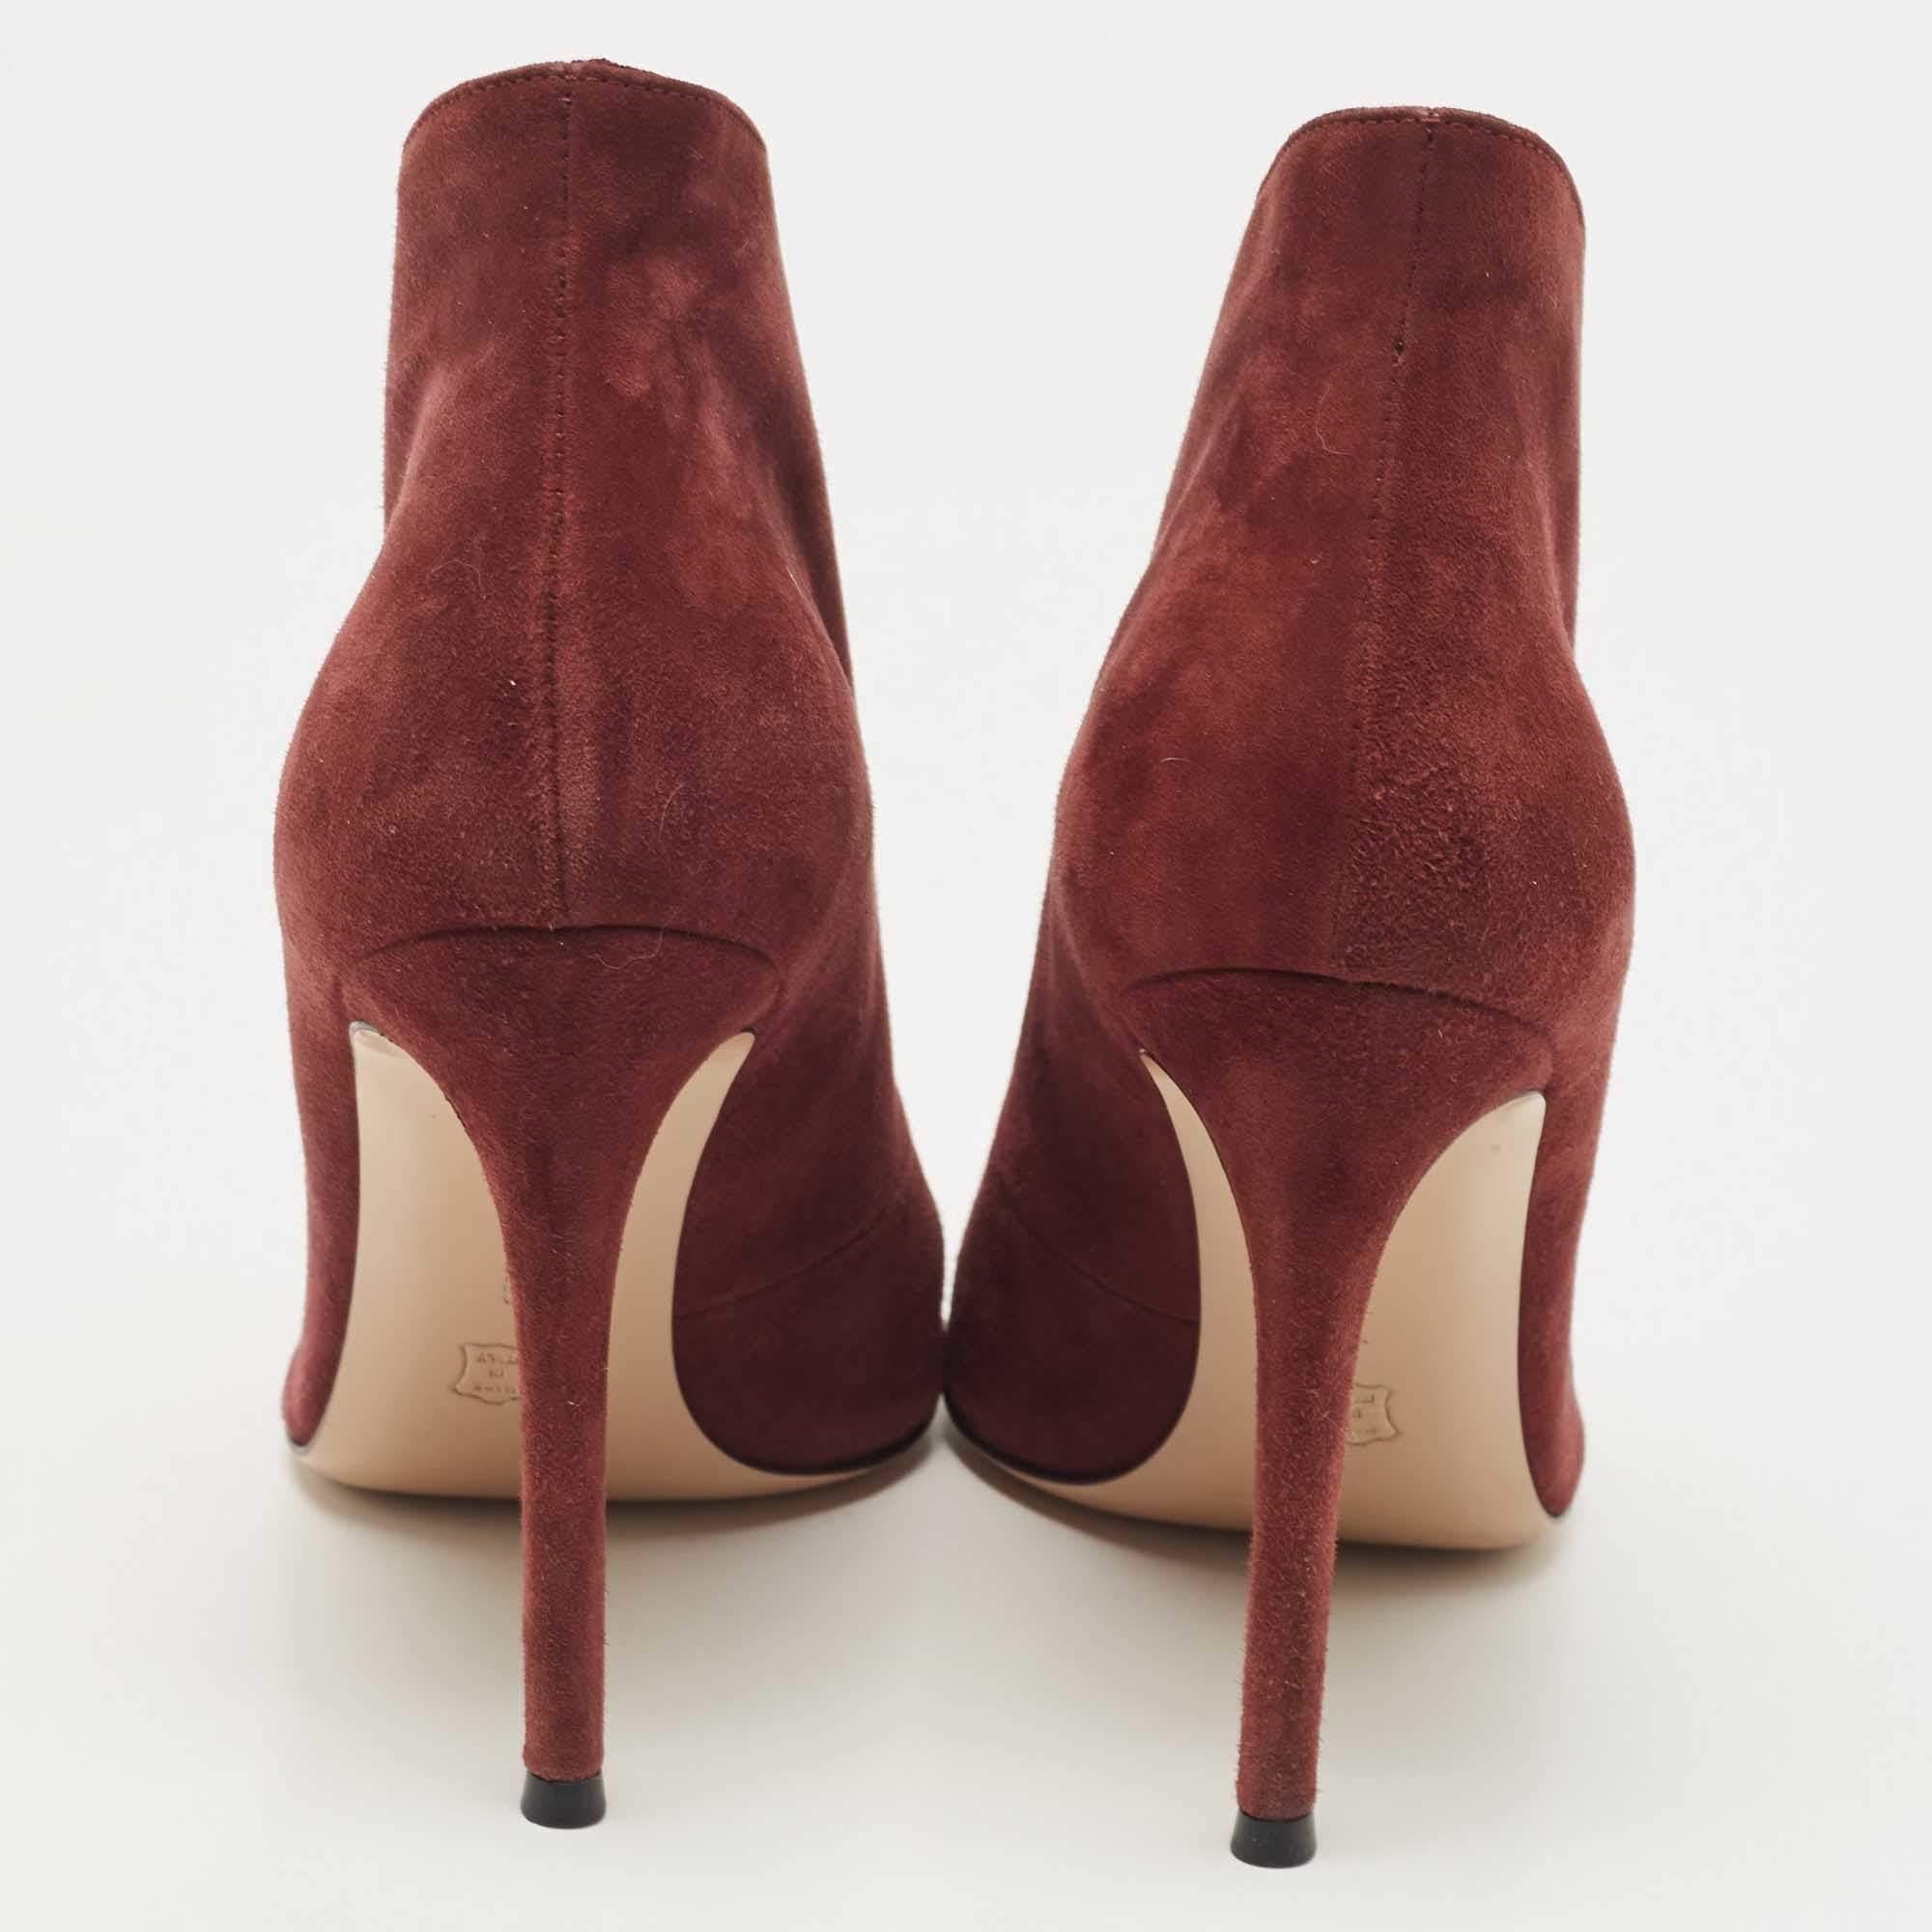 Women's Gianvito Rossi Burgundy Suede Vamp Ankle Length Boots Size 38.5